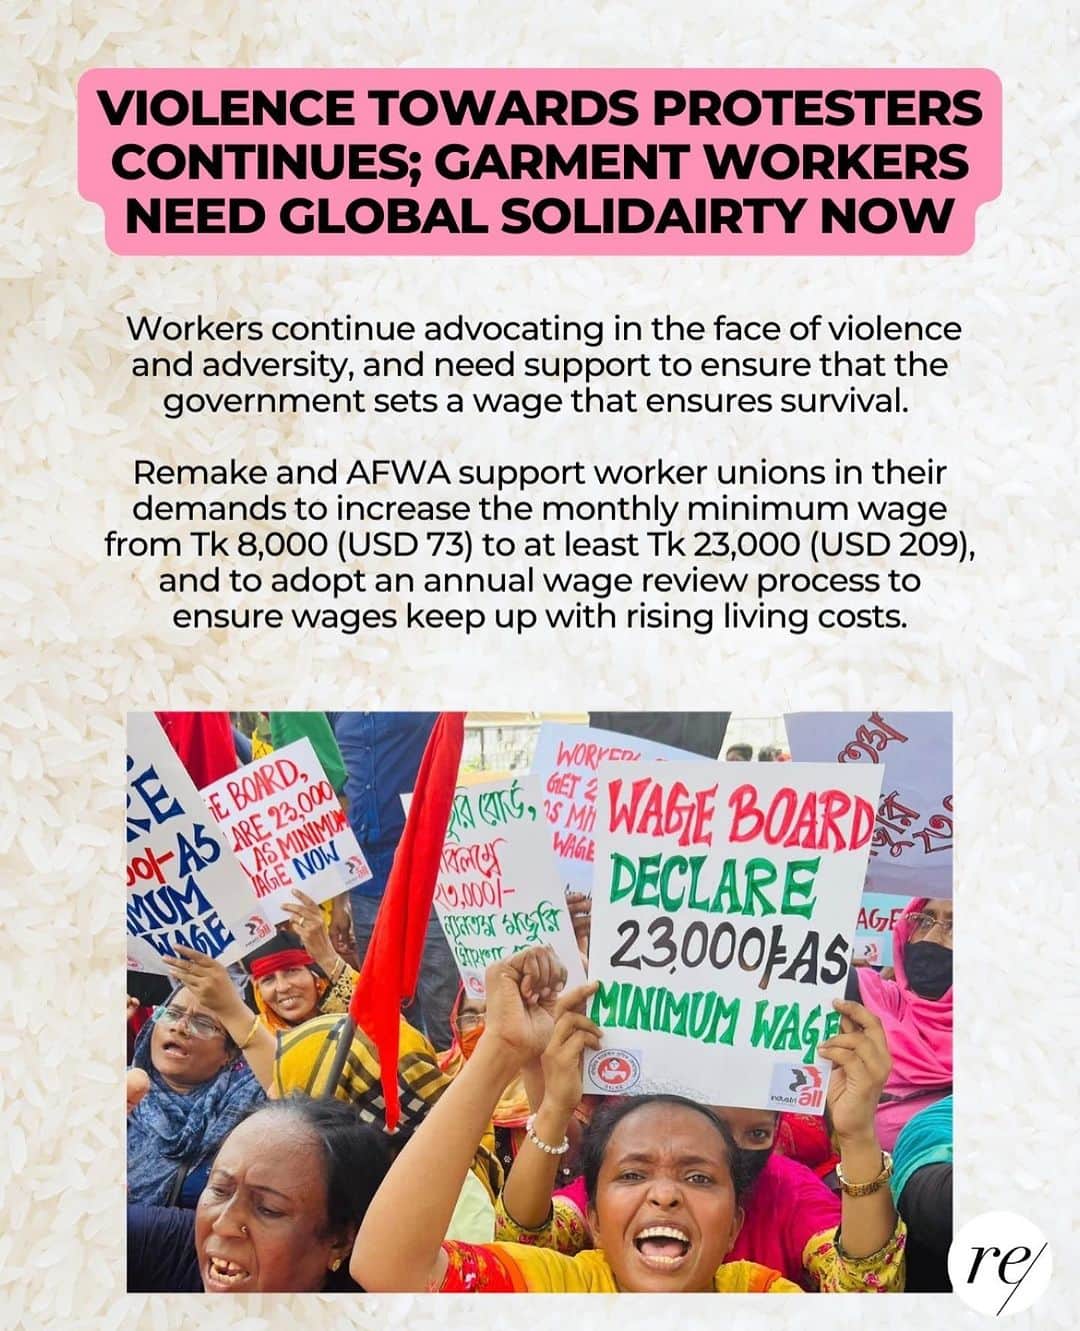 キャメロン・ラッセルのインスタグラム：「URGENT: Two Bangladeshi Workers have been Killed - Garment Workers Need Your Support & Amplfication  After months of organizing, many worker unions across Bangladesh have rallied around Tk 23,000 ($209 USD), for a new minimum monthly salary figure in the country. They currently receive one of the lowest minimum wages of all countries producing ready made garments (lower than China, India, Cambodia) of just $73/month. TOMORROW November 1st the Wage Board will make a decision and Bangladeshi workers ask for global solidarity behind this specific figure.   Yesterday Md Rasel Hawlader, aged 25, a maintenance machinist at Design Express Garments Ltd. was shot and killed by the Bangladeshi police (October 30).   Md Rasel is a member of the Design Express Sommilito Sramik Union, which is affiliated with the Sommilito Garments Sramik Federation union.   This is a developing story.  At this pivotal juncture in the wage setting process, workers, who continue to advocate for their demands in the face of violence and adversity, need support to ensure that the government sets a wage that at least ensures basic resources to survive.  As academic Minh-Ha Pham has written about previous protests for better wages in Bangladesh: “The Western fashion media wield incredible influence on the public’s awareness and understanding of consumer and corporate social responsibility. Their choice to ignore these protests speaks volumes about the limits of “ethical fashion”—a movement whose concerns don’t extend to politically empowered fashion workers or events that incriminate mid- and top-market brands. The fashion media’s silence is not just irresponsible; it’s unethical.”   This is why it is urgent that those of us with social media platforms make noise today and answer the call from 4.5 million workers for a more livable wage and to adopt an annual wage review process to ensure wages keep up with rising living costs. 📣  #23000takaminimumwage #23000taka」